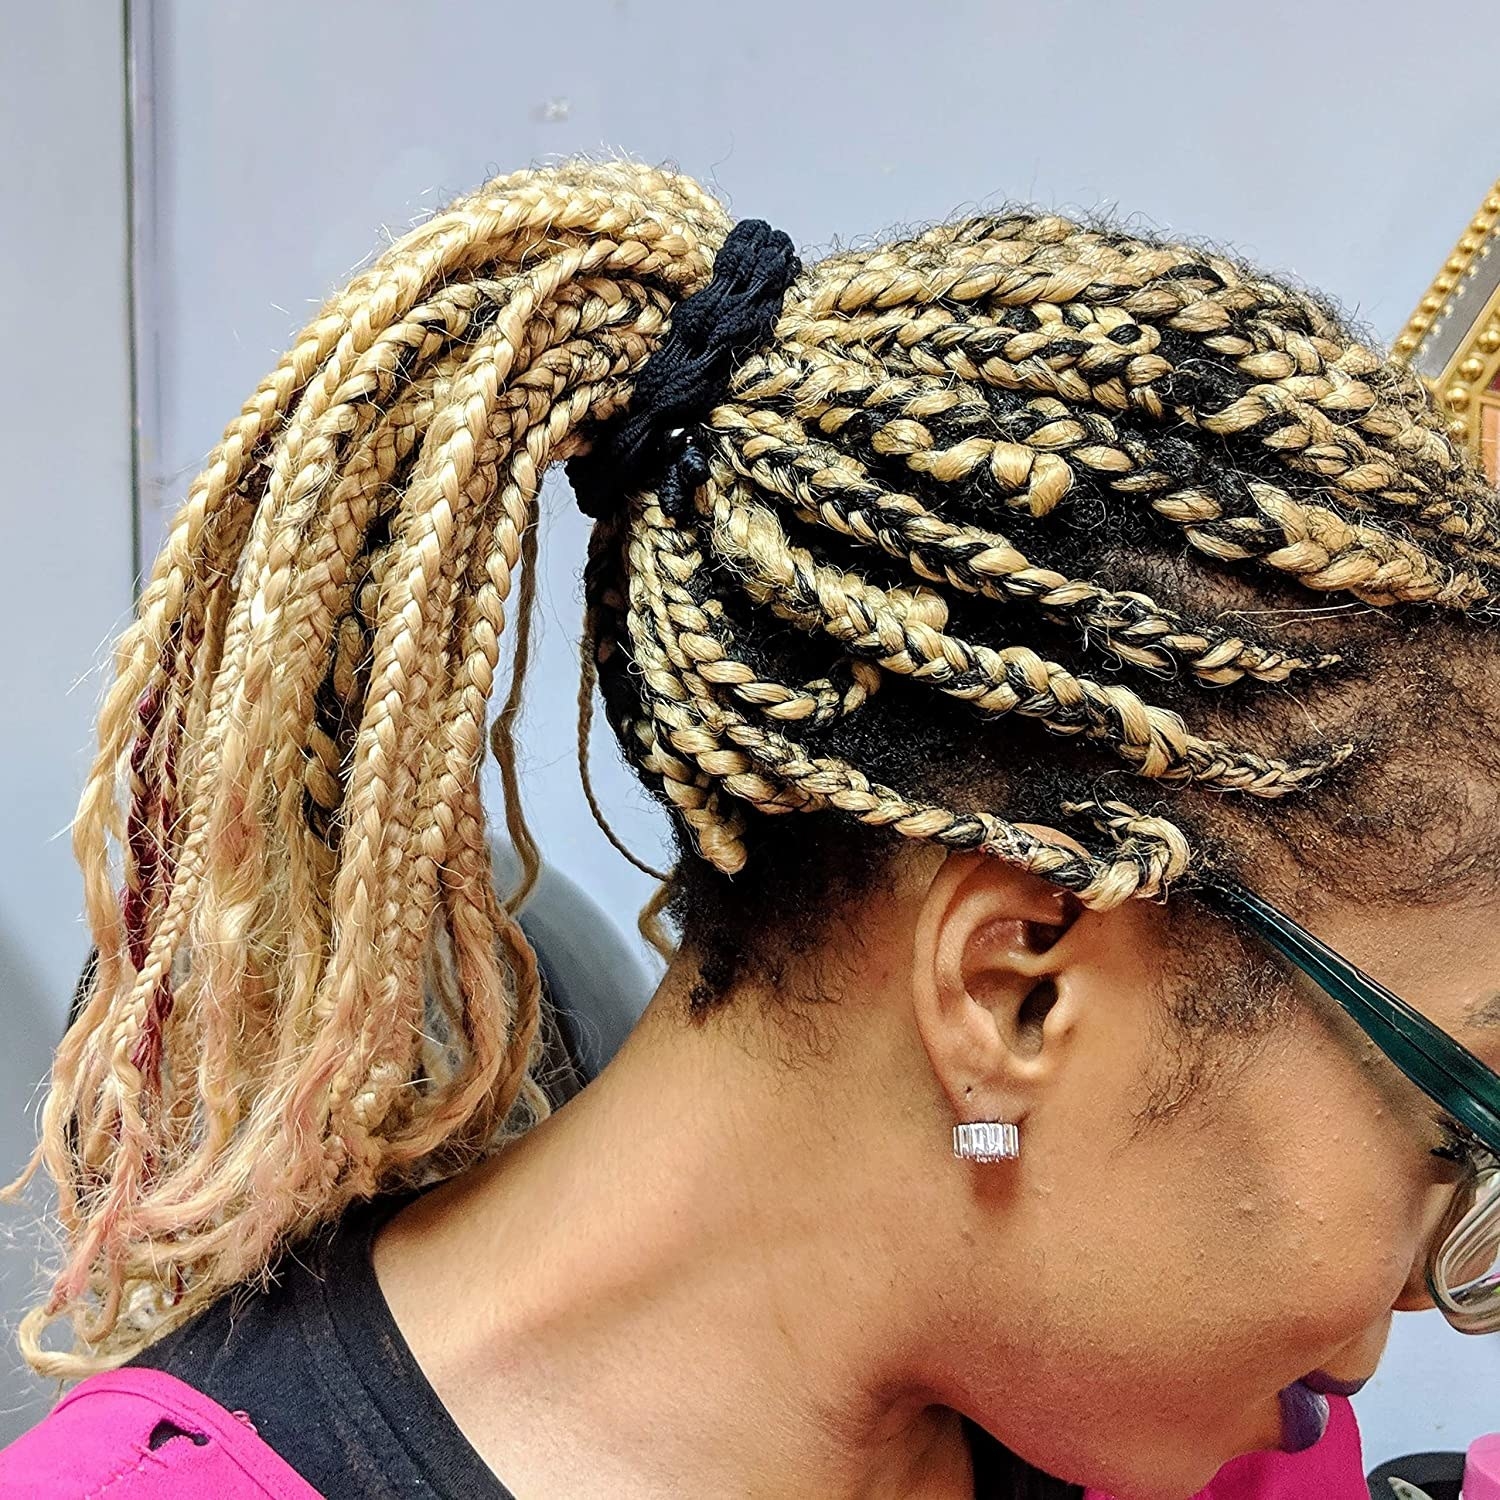 A person using the hair tie to hold their braided ponytail in place